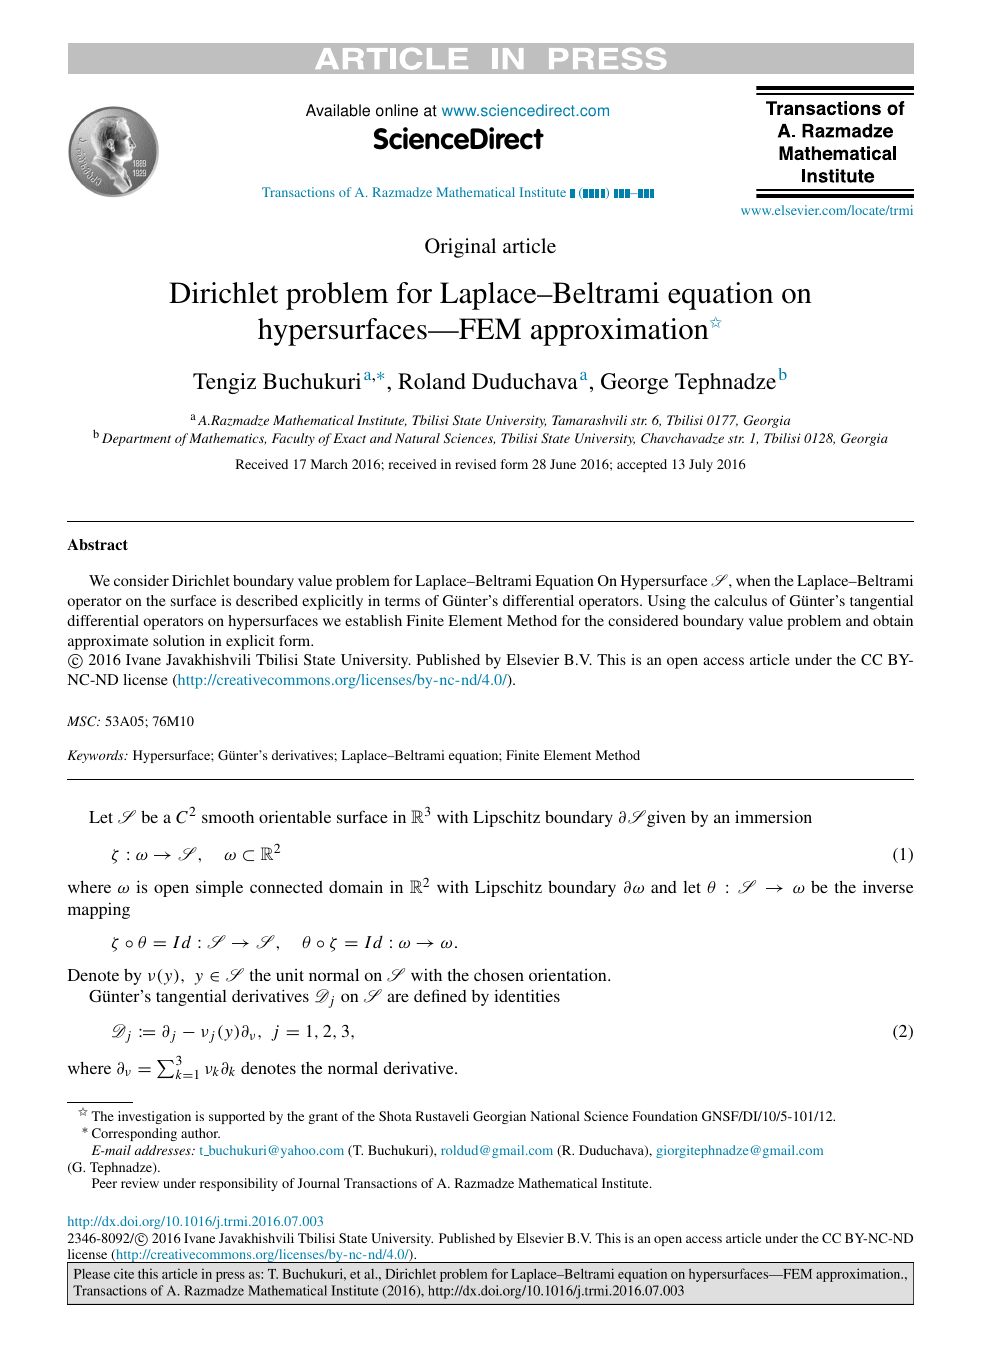 Dirichlet Problem For Laplace Beltrami Equation On Hypersurfaces Fem Approximation Topic Of Research Paper In Mathematics Download Scholarly Article Pdf And Read For Free On Cyberleninka Open Science Hub